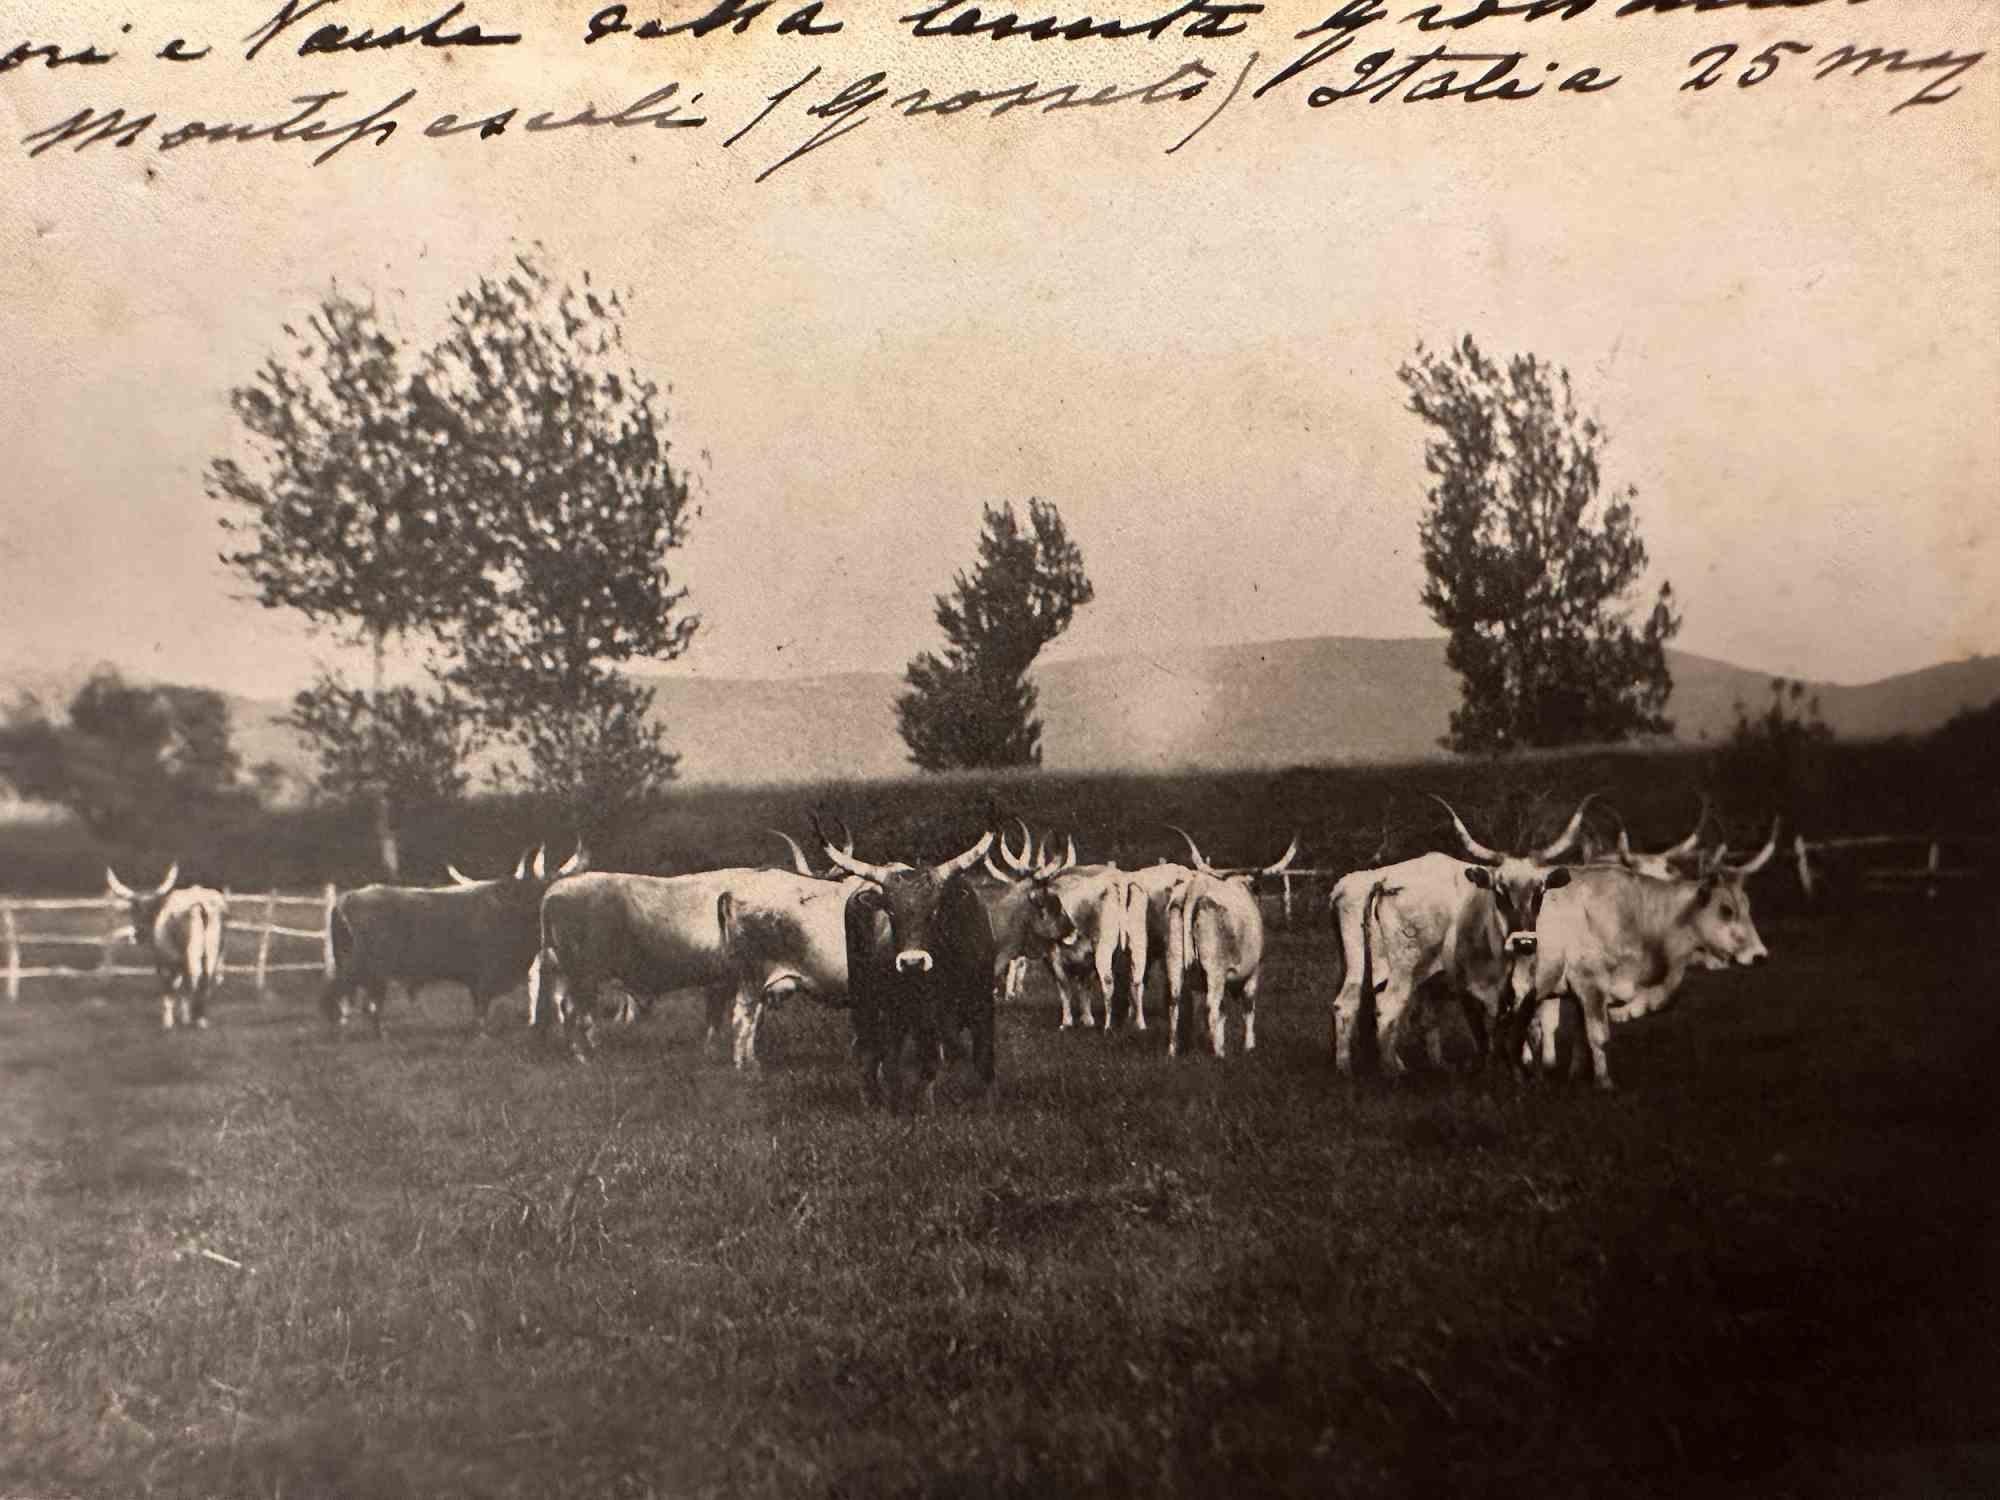 Unknown Figurative Photograph - The Old Days  Photo - Herds in Grosseto (Maremma, Tuscany)- Early 20th Century